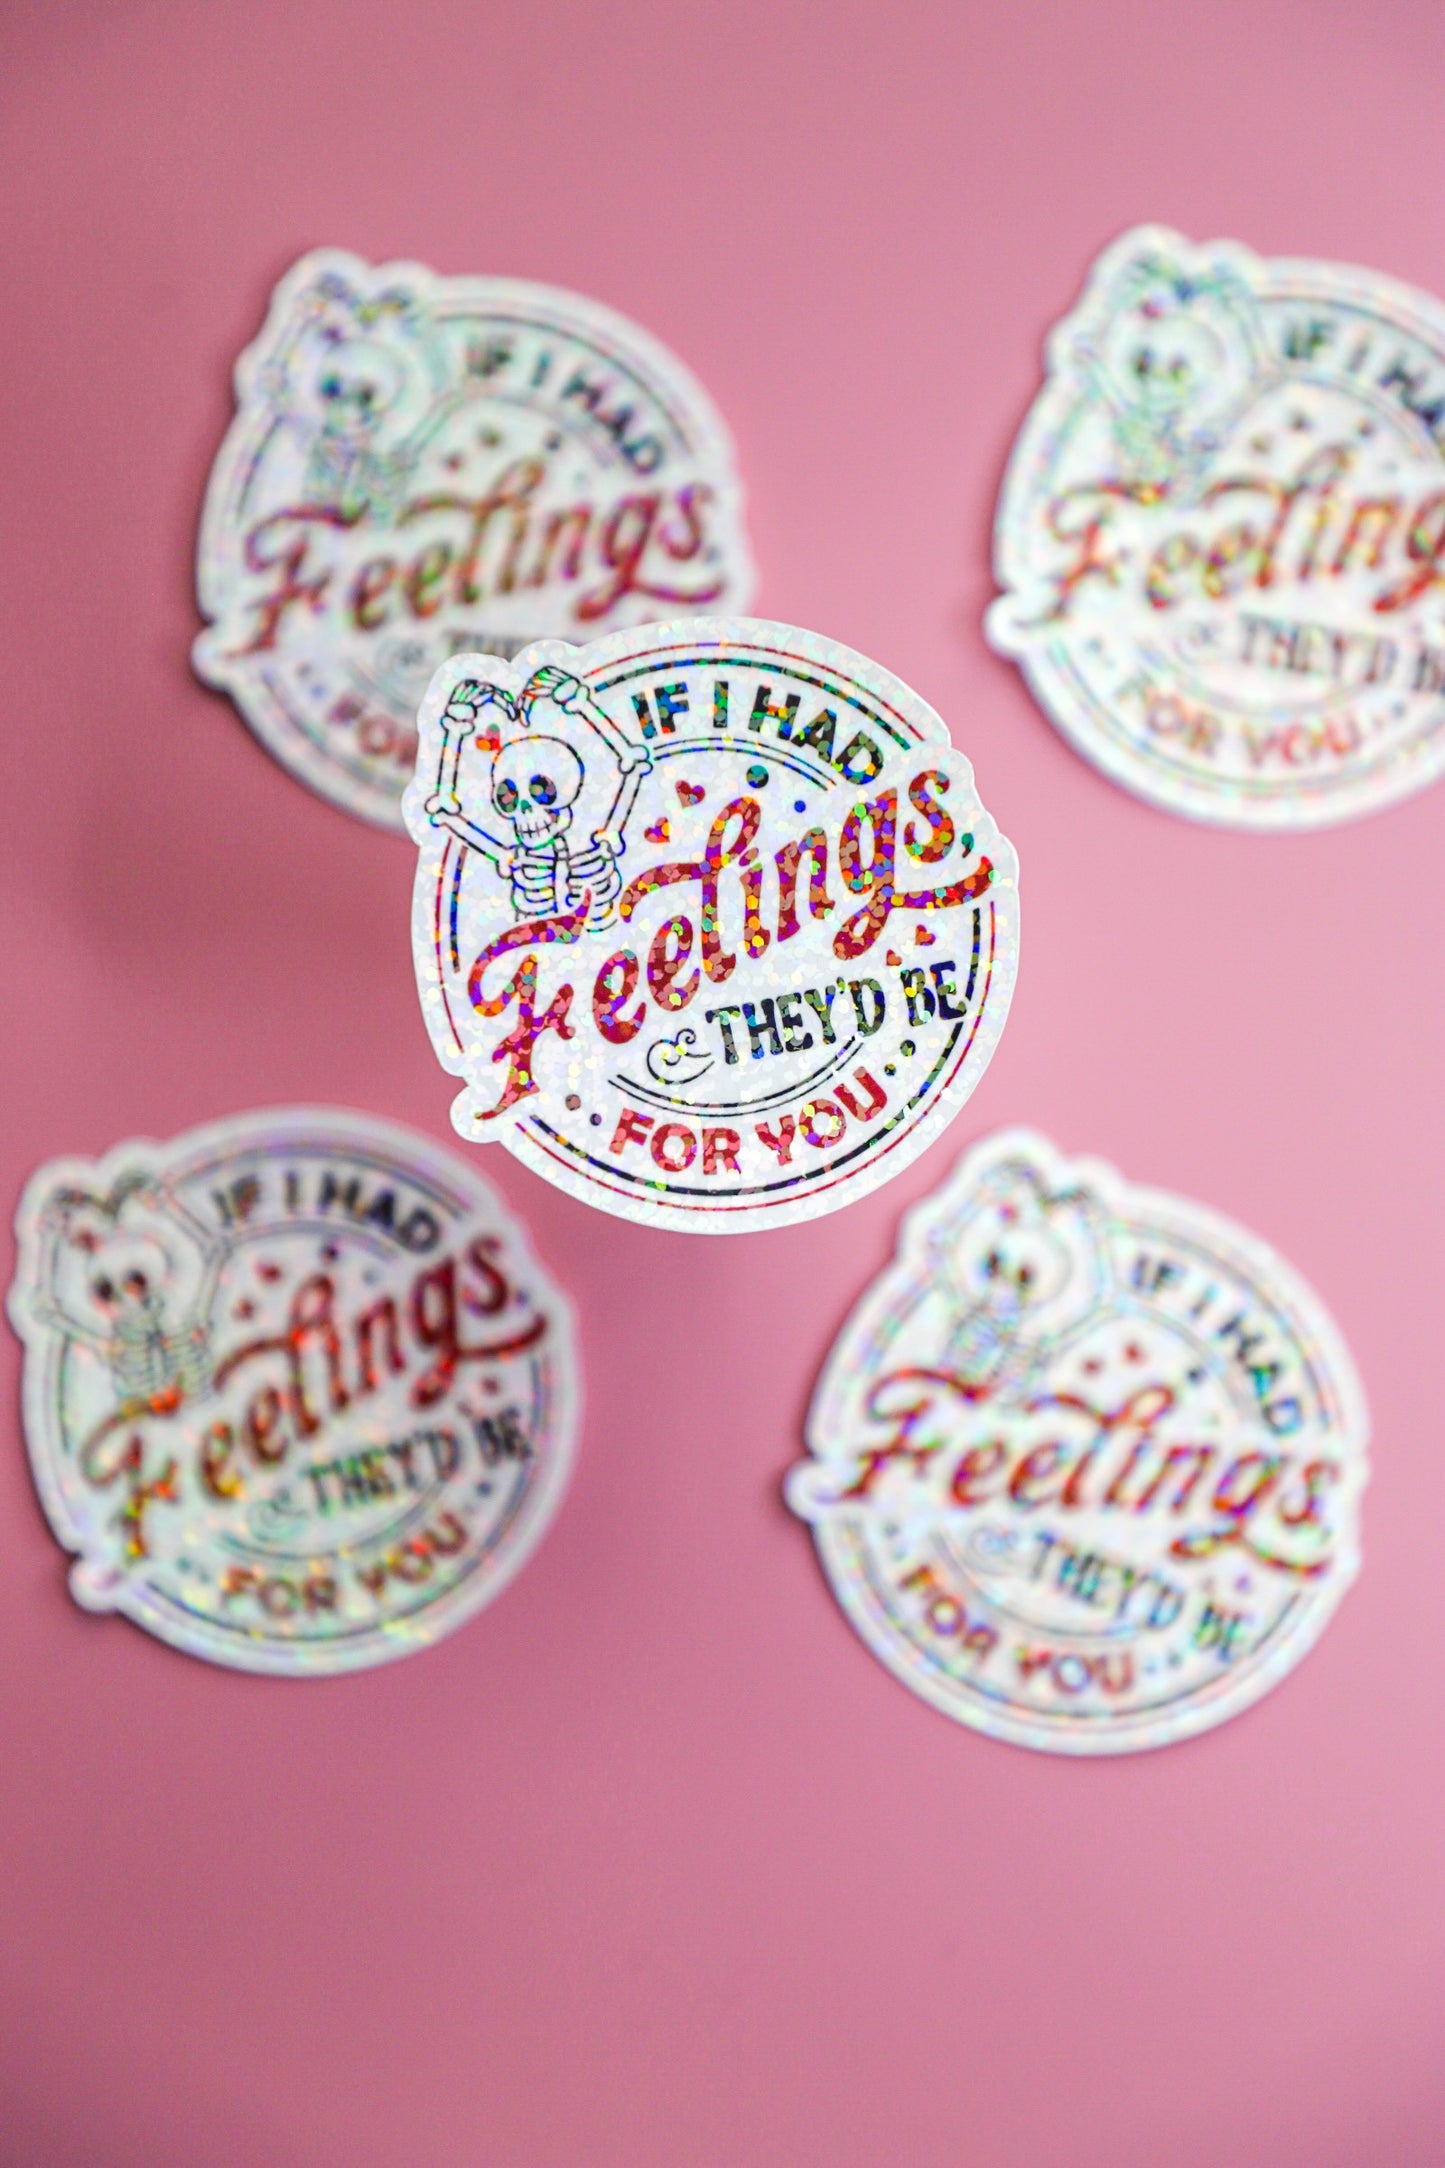 If I Had Feelings They’d Be For You Glitter Sticker